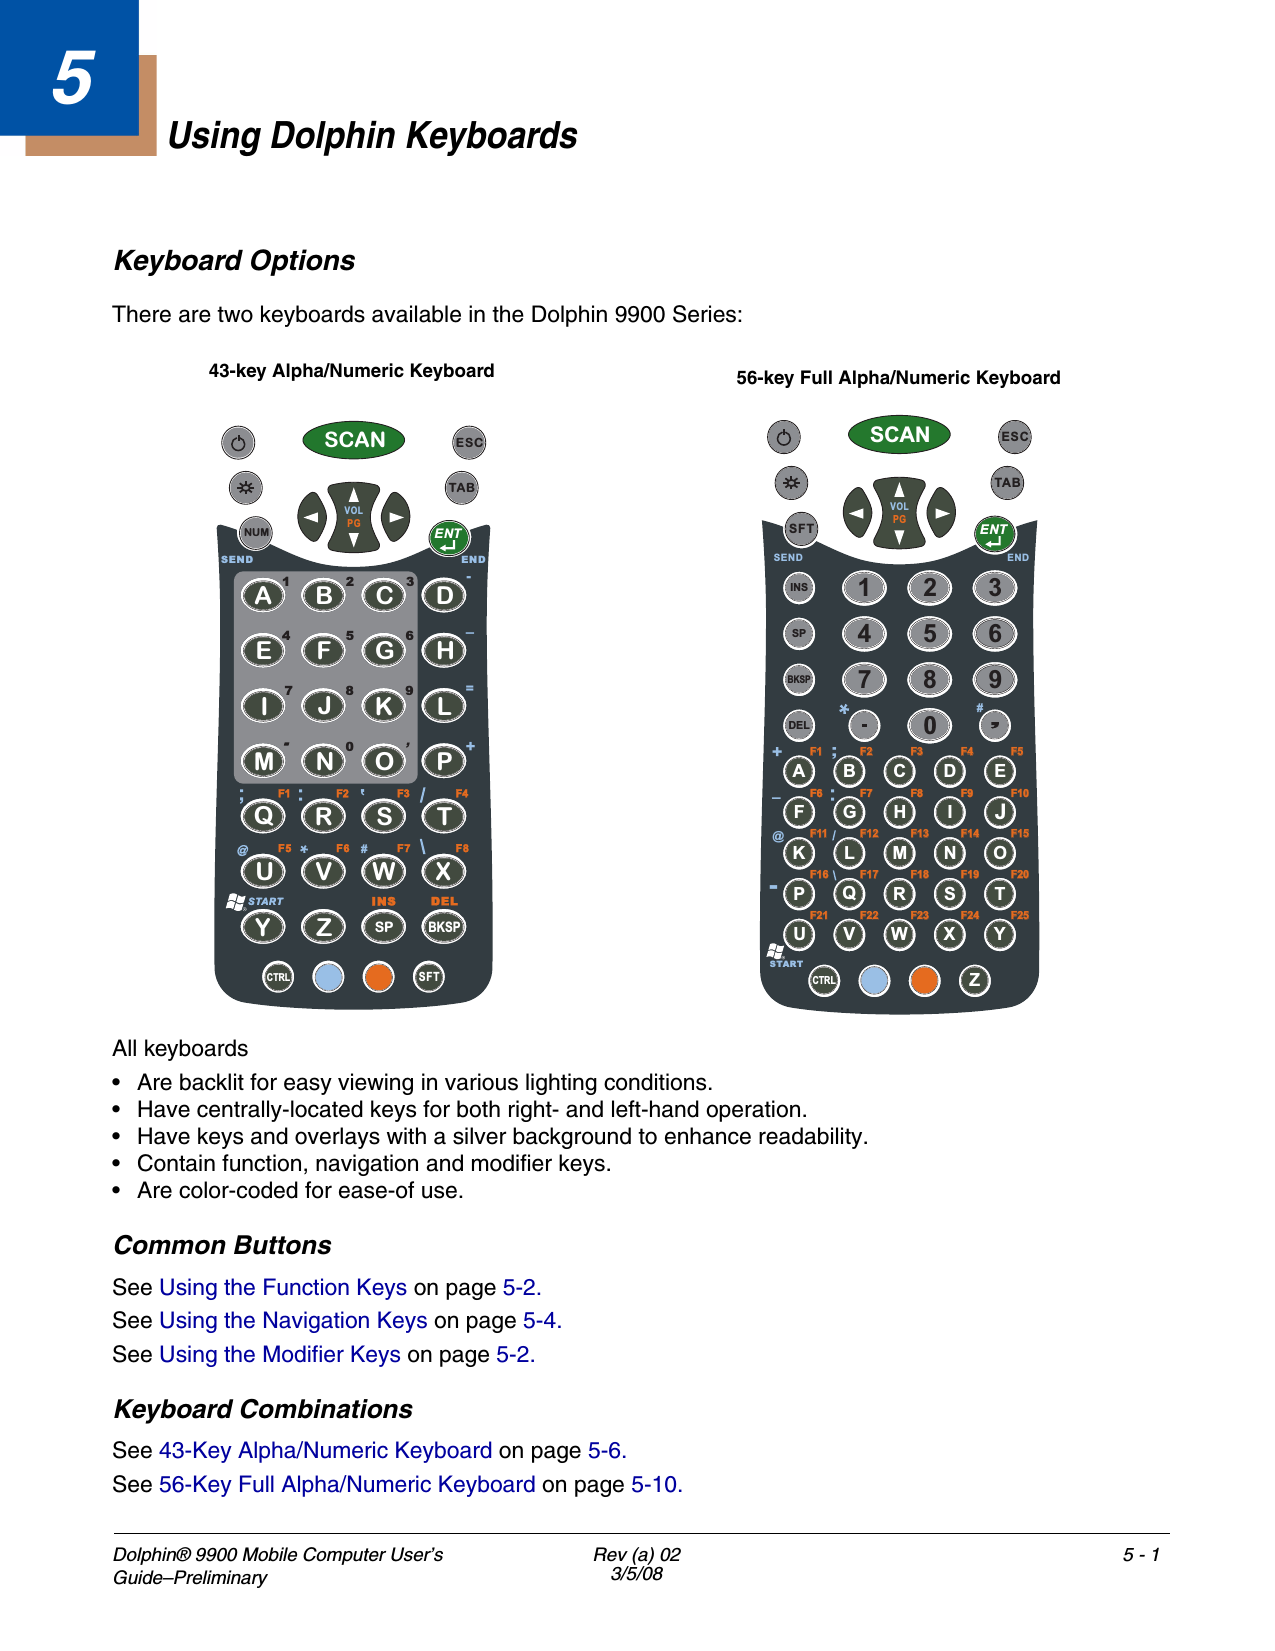 Dolphin® 9900 Mobile Computer User’s Guide–Preliminary Rev (a) 023/5/085 - 15Using Dolphin KeyboardsKeyboard OptionsThere are two keyboards available in the Dolphin 9900 Series:All keyboards• Are backlit for easy viewing in various lighting conditions. • Have centrally-located keys for both right- and left-hand operation. • Have keys and overlays with a silver background to enhance readability.• Contain function, navigation and modifier keys. • Are color-coded for ease-of use.Common ButtonsSee Using the Function Keys on page 5-2.See Using the Navigation Keys on page 5-4.See Using the Modifier Keys on page 5-2.Keyboard CombinationsSee 43-Key Alpha/Numeric Keyboard on page 5-6.See 56-Key Full Alpha/Numeric Keyboard on page 5-10.CTRLSCANSFTESCTABENTABCDEFGIJKLMNOPQR S TUVWXYZSP BKSPHVOLPGNUMF7F6F5DELENDSENDSTART7801425369F8F3F2F1 F4START,=-_#‘+INSSCANSFTESCTABENTCTRLSPBKSPDELINS1234567890ABCDEFGH I JKLMNOPQR S TUVWX YZVOLPGENDSEND_@F6F6F7F7F8F8F9F9F10F10F11F11F12F12F13F13F14F14F15F15F16F16F17F17F18F18F19F19F20F20F21F21F22F22F23F23F24F24F25F25_;F1F1F2F2F3F3F4F4F5F5+START#43-key Alpha/Numeric Keyboard 56-key Full Alpha/Numeric Keyboard